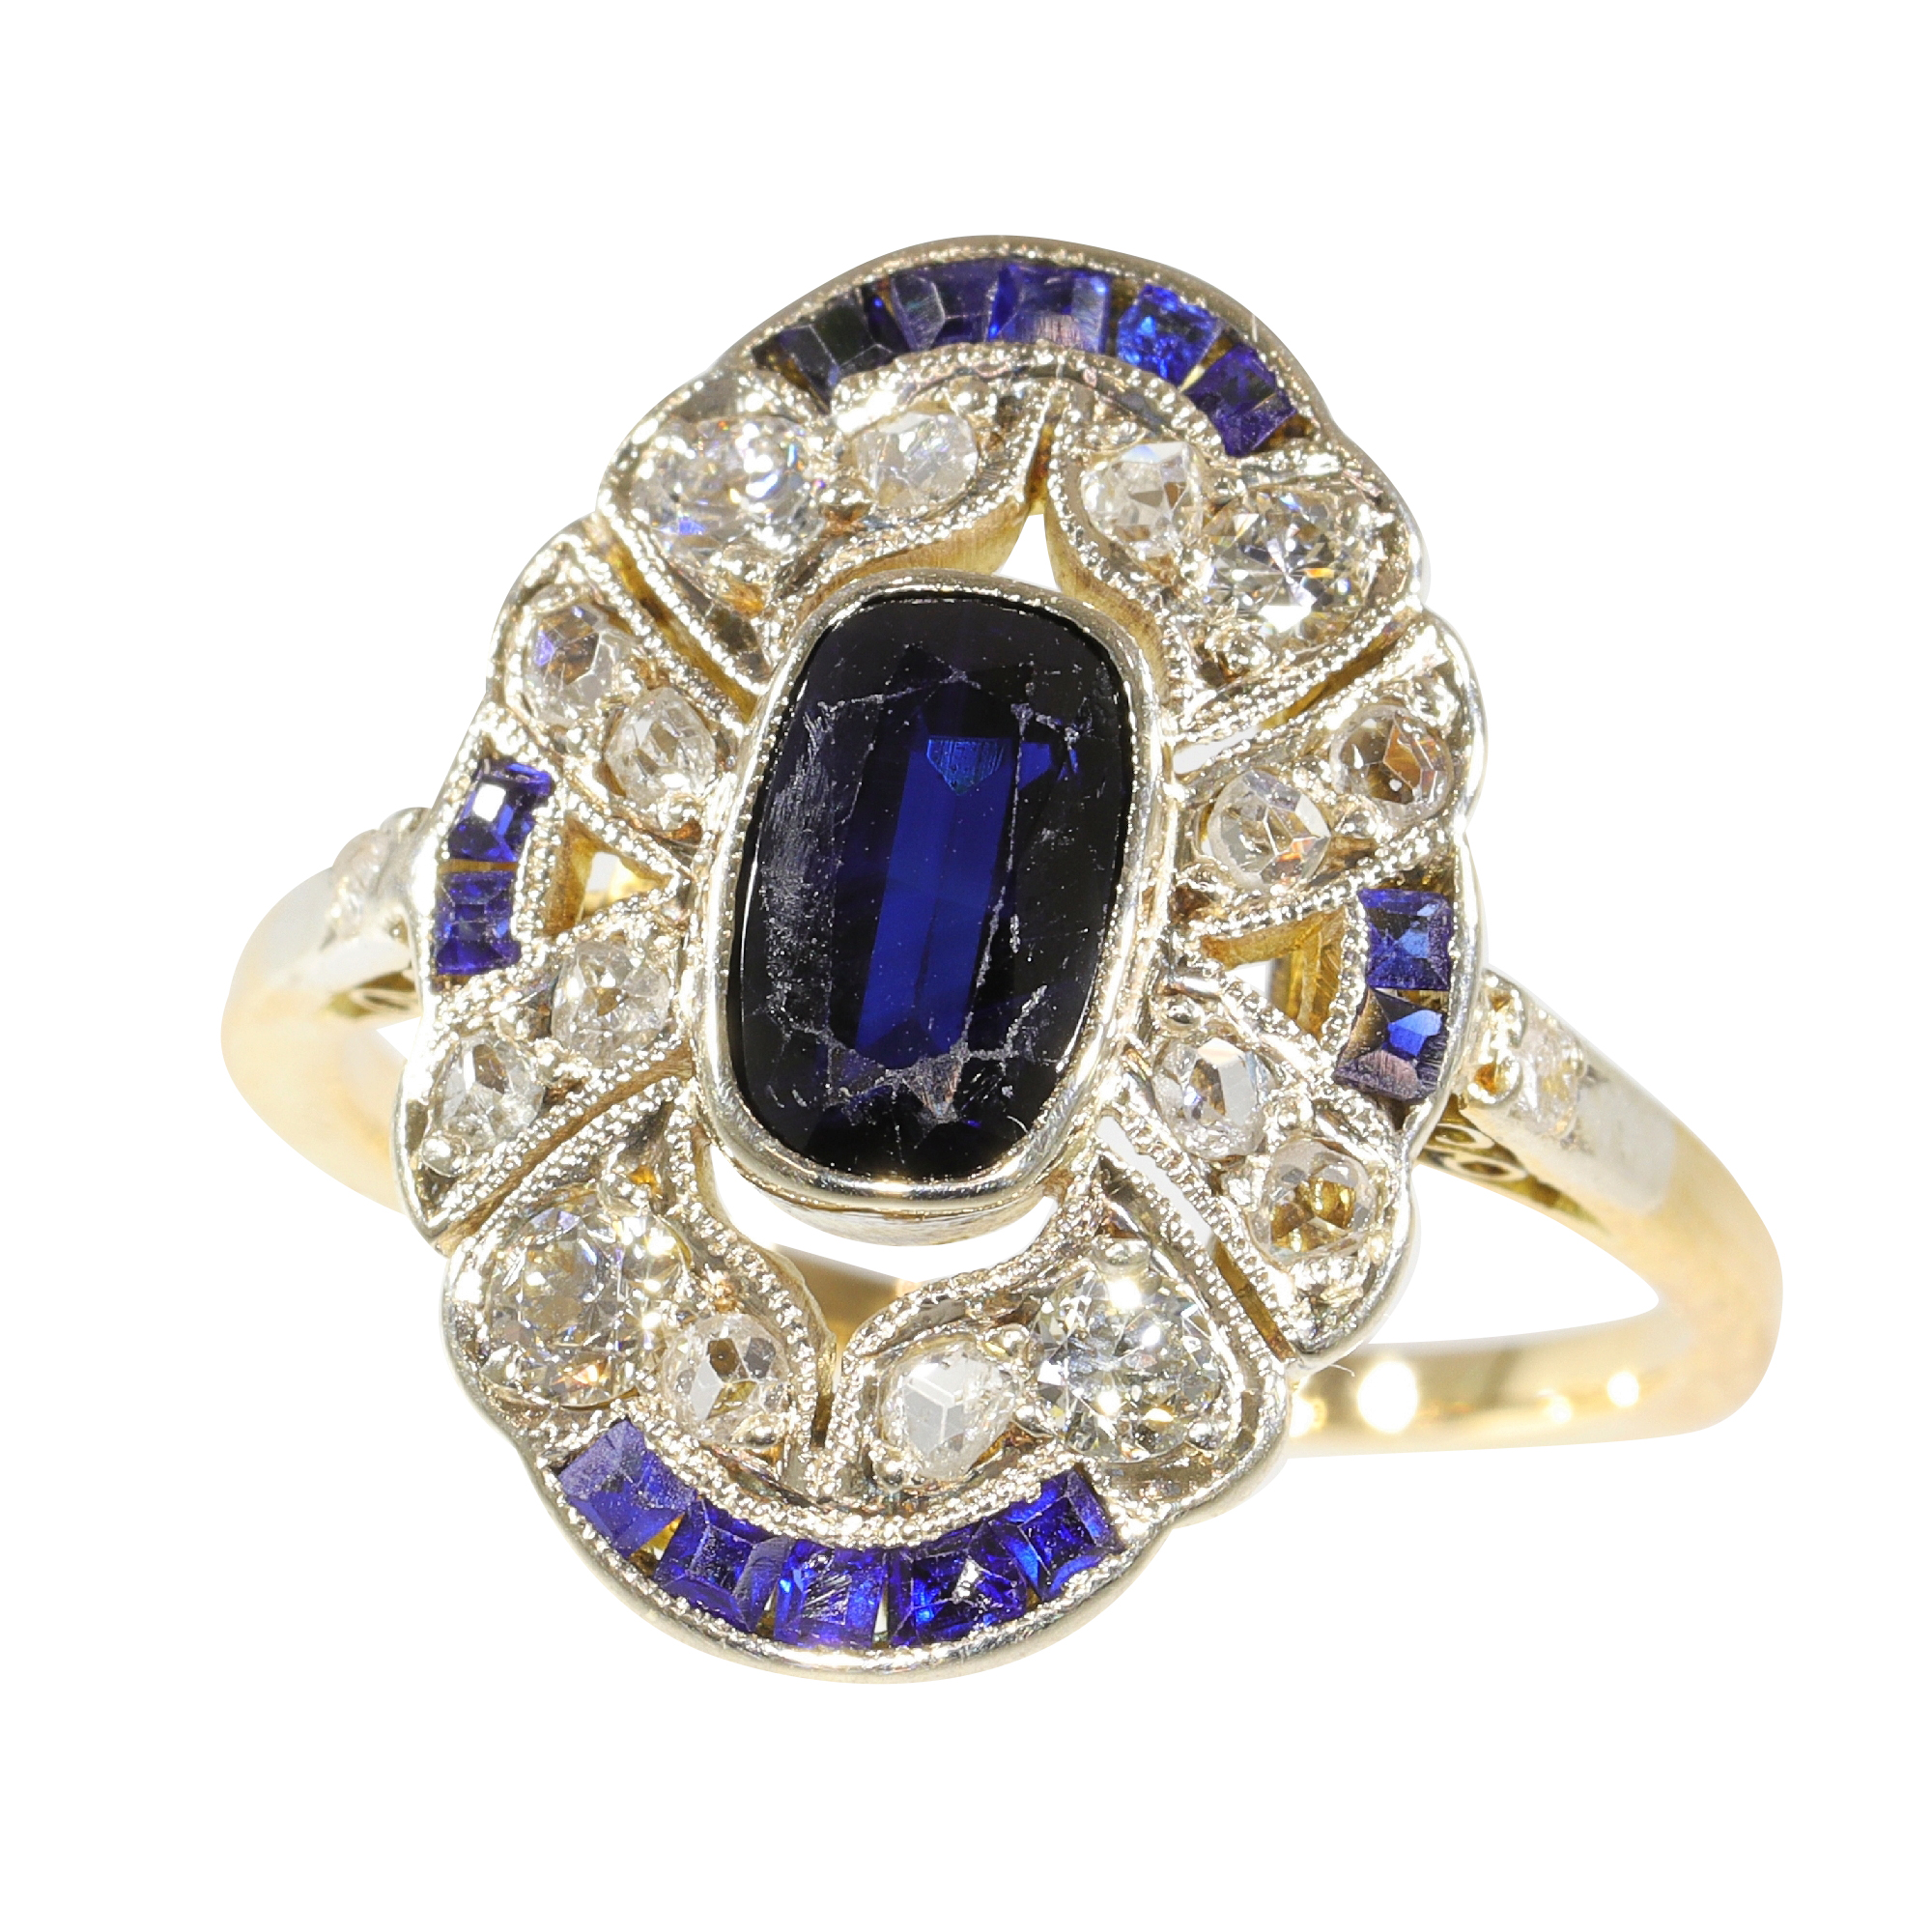 Vintage 1930's Art Deco diamond and sapphire engagement ring